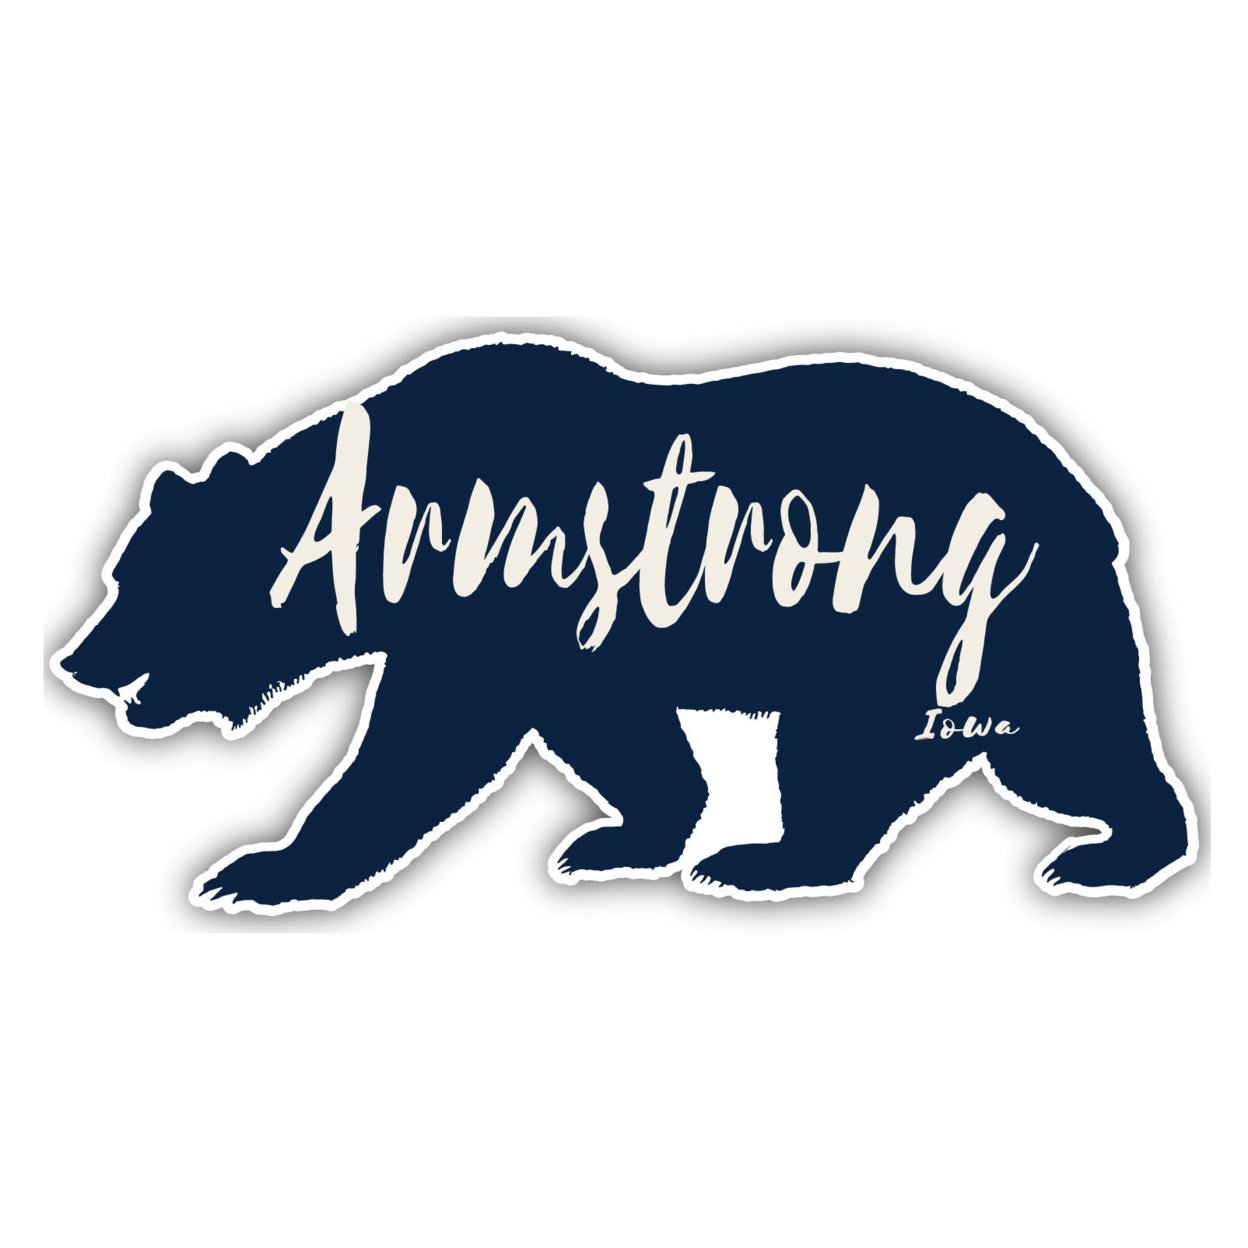 Armstrong Iowa Souvenir Decorative Stickers (Choose Theme And Size) - Single Unit, 6-Inch, Bear